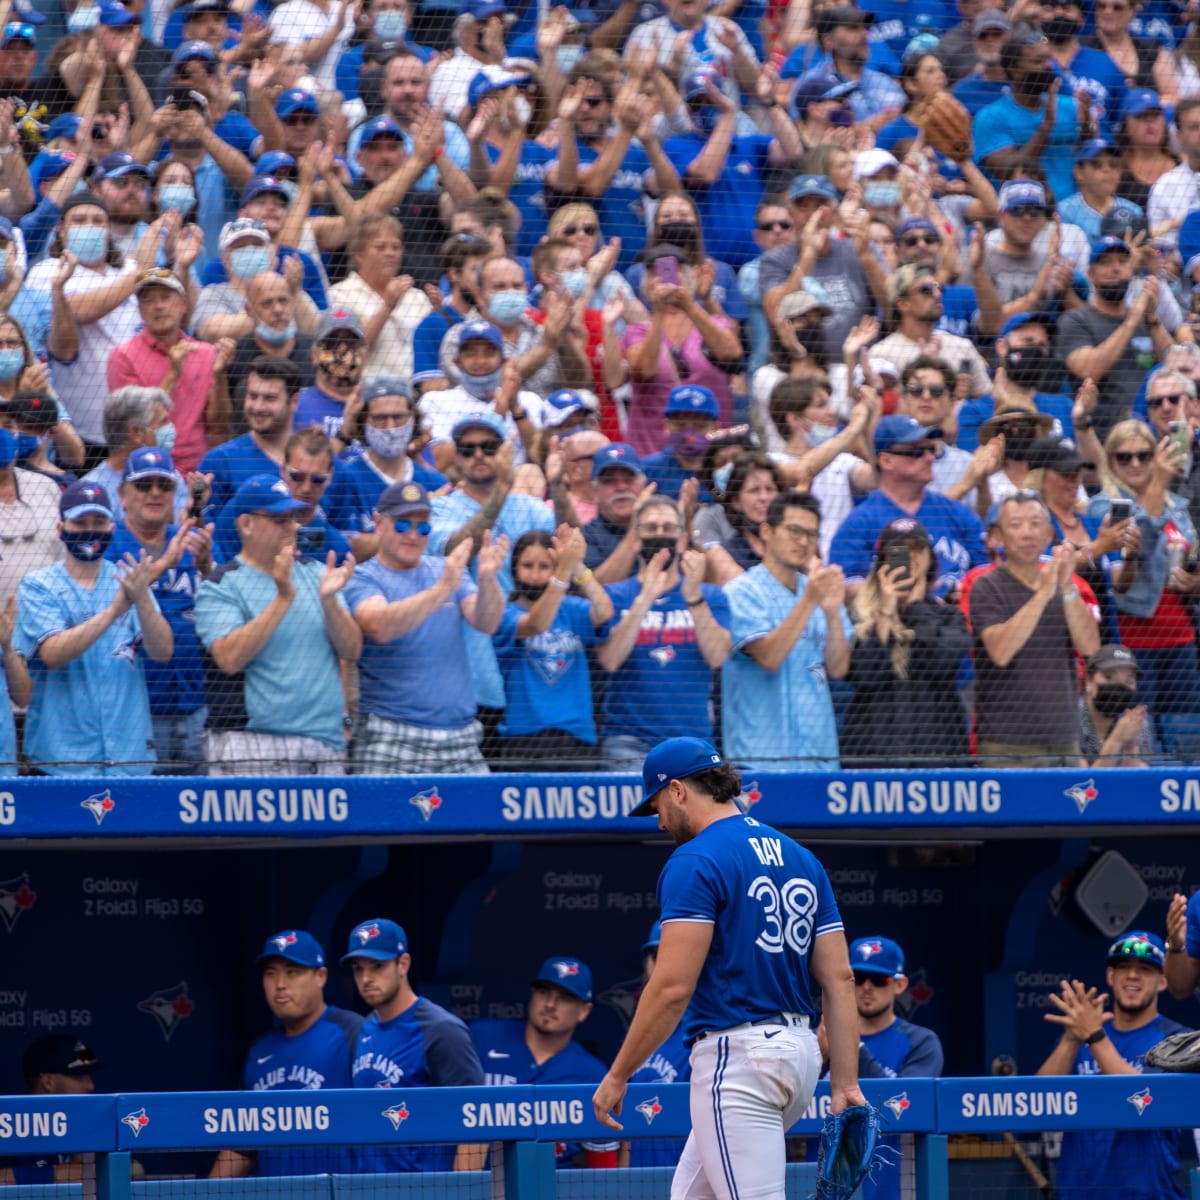 Blue Jays to require full vaccination, eye potential Rogers Centre